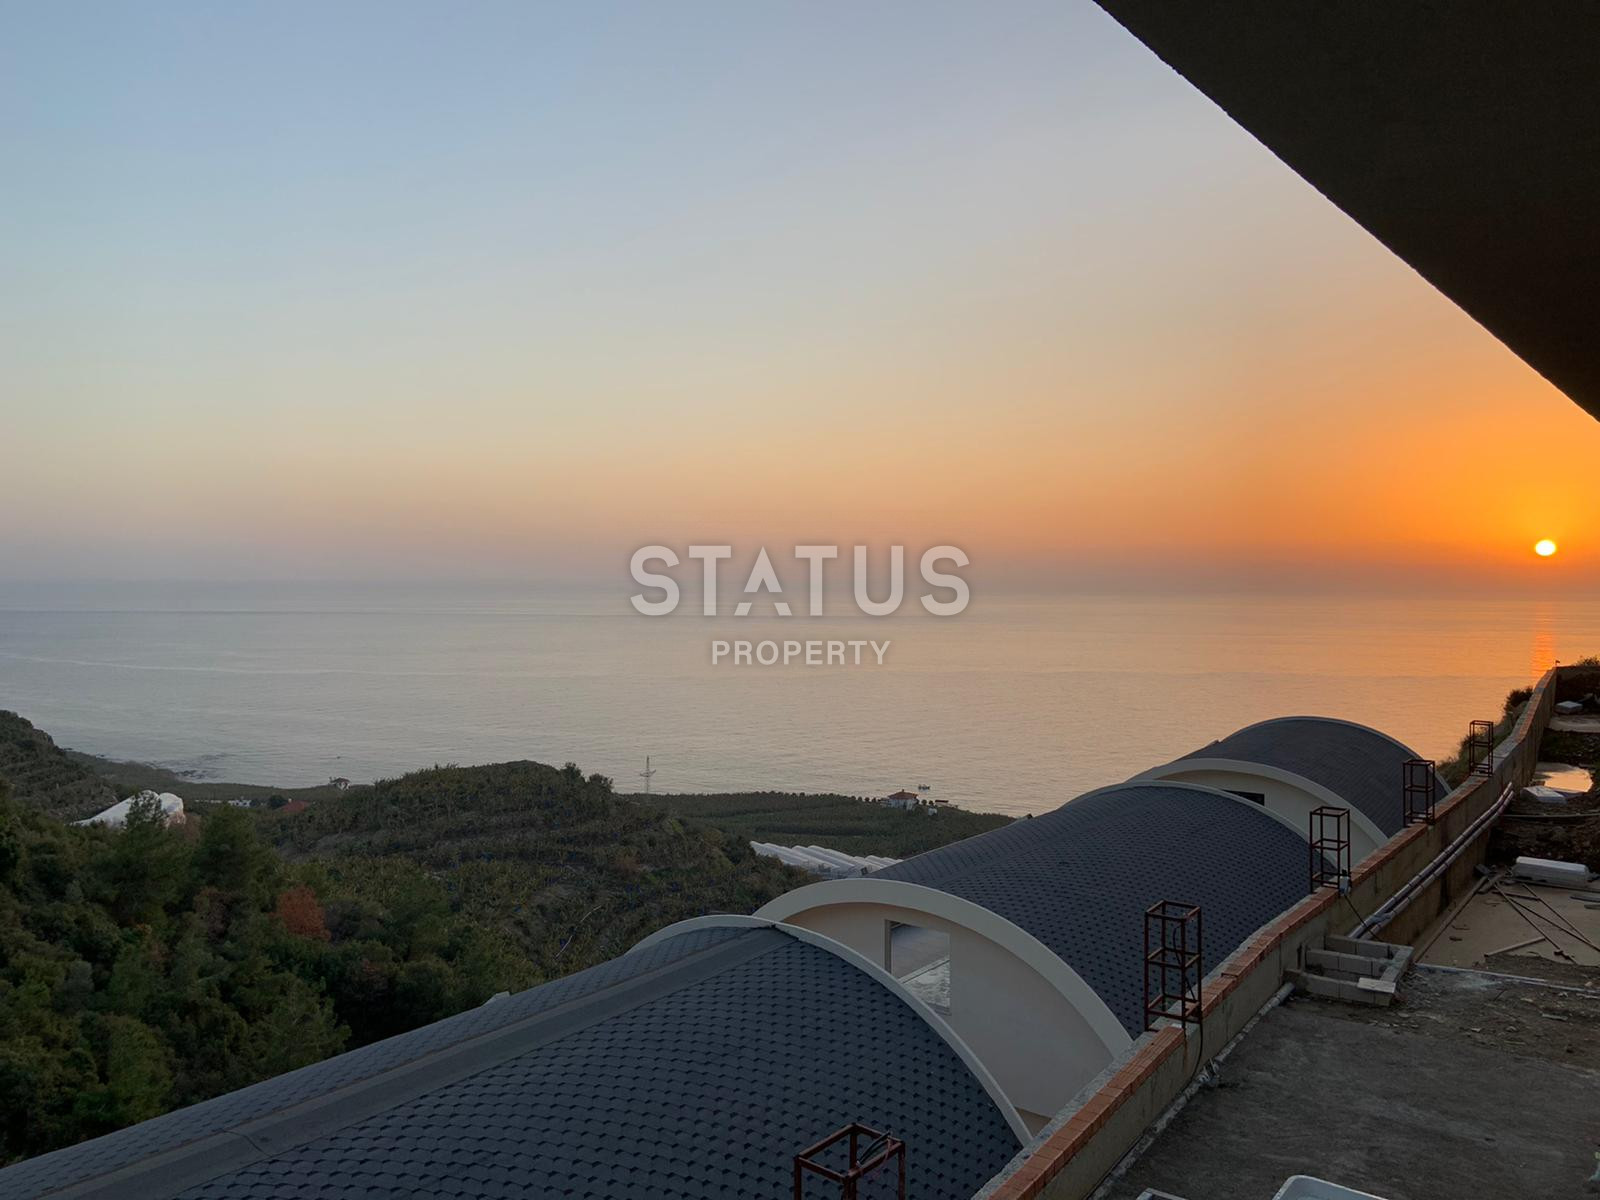 Villa with mesmerizing views and the possibility of obtaining citizenship фото 2